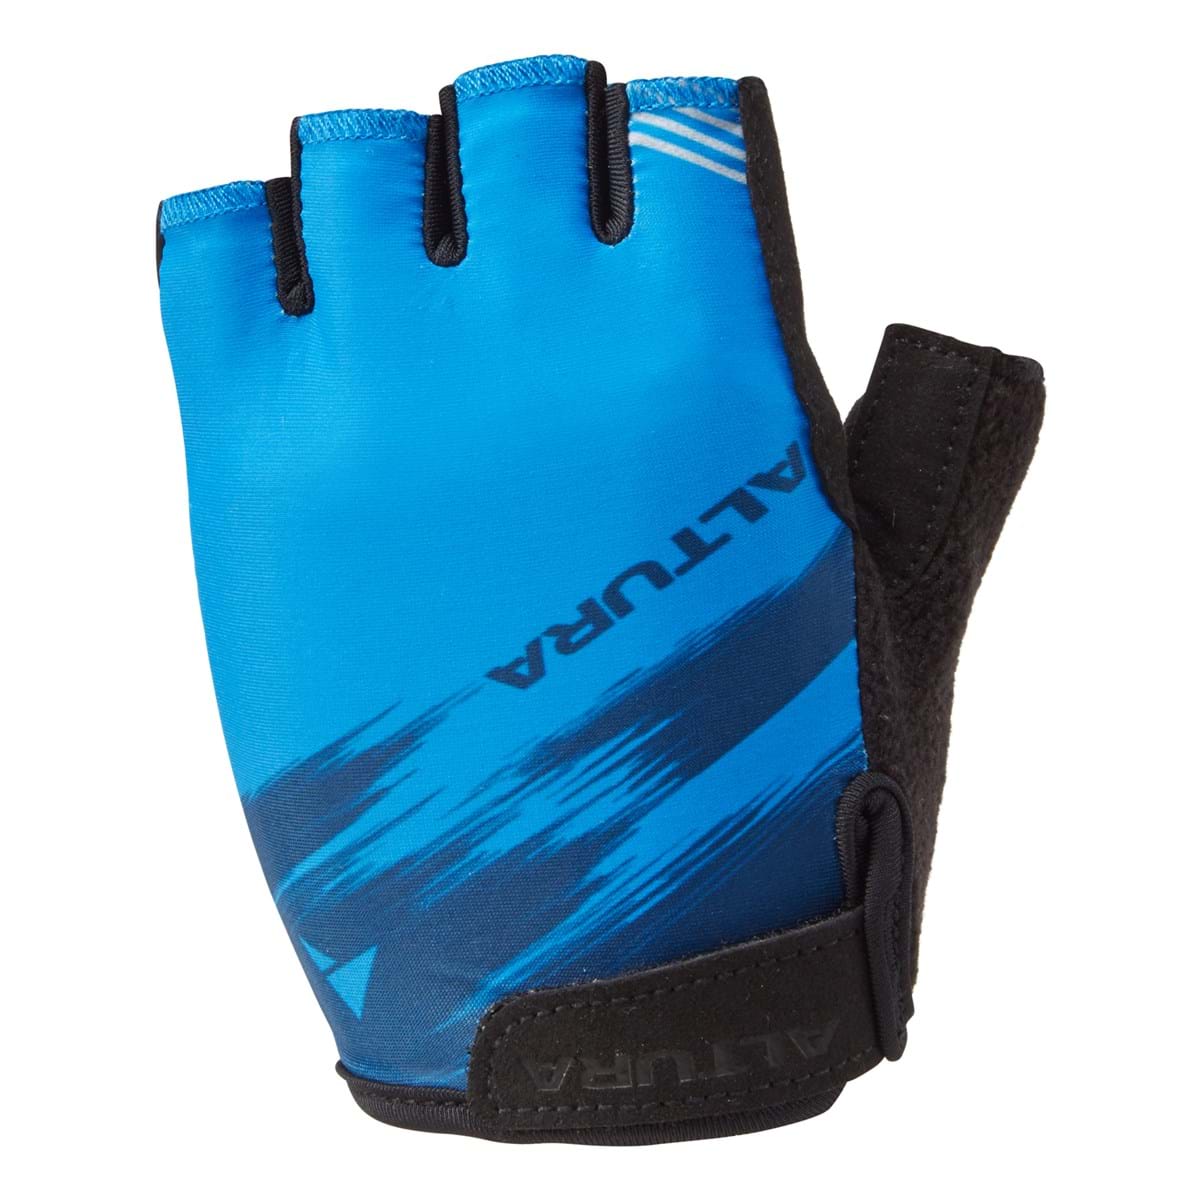 Altura Enfant Airstream - Cycling gloves - Kids